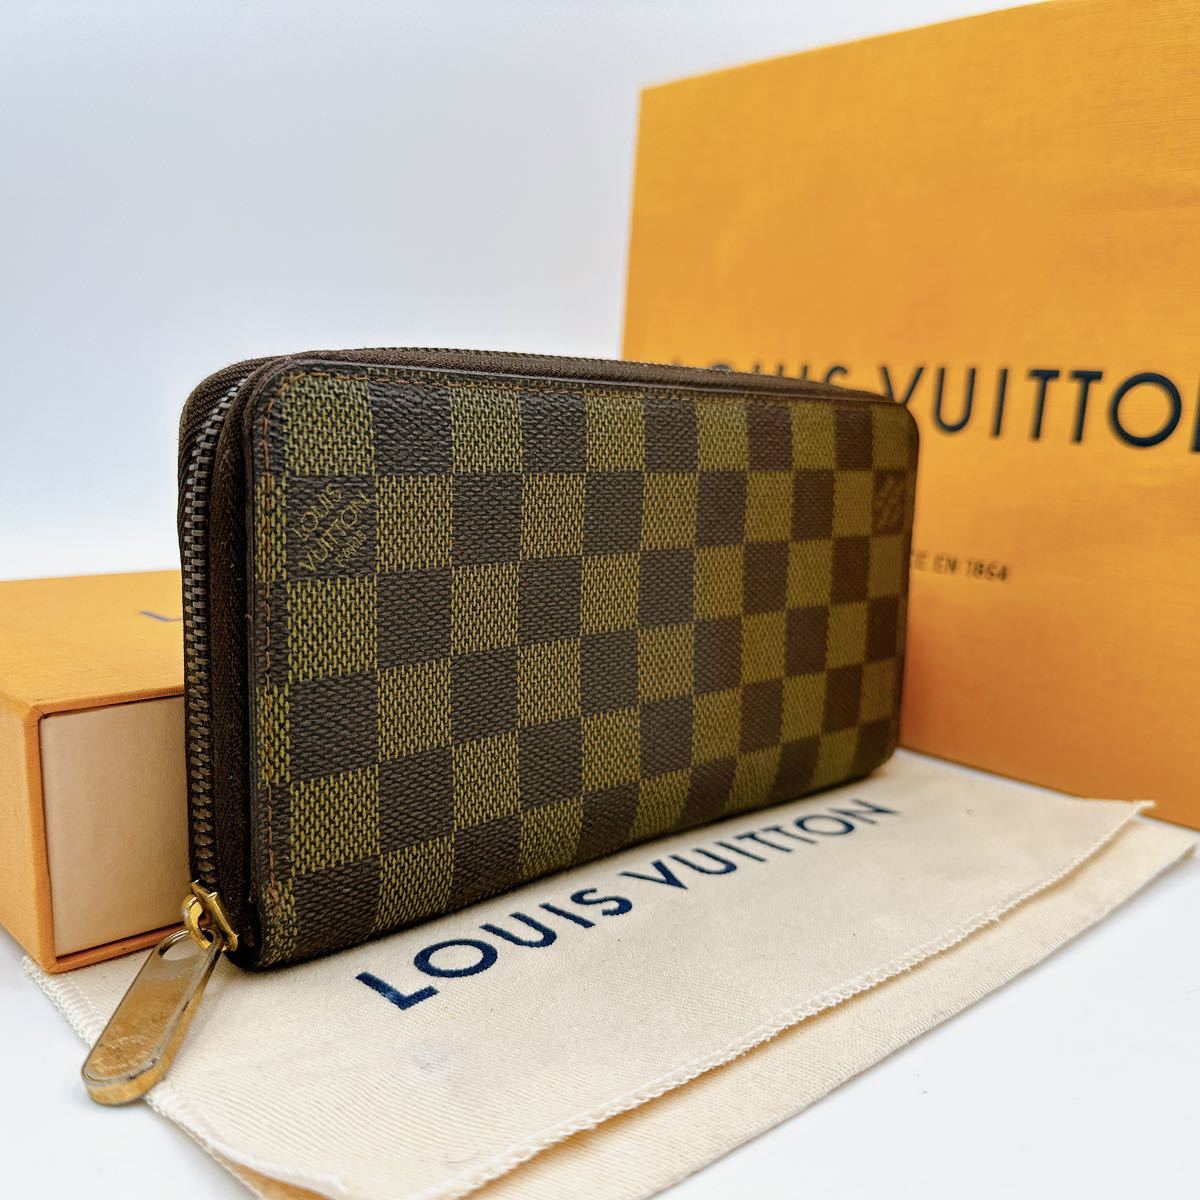 A2169【美品】LOUIS VUITTON ルイヴィトン ダミエ ジッピーウォレット